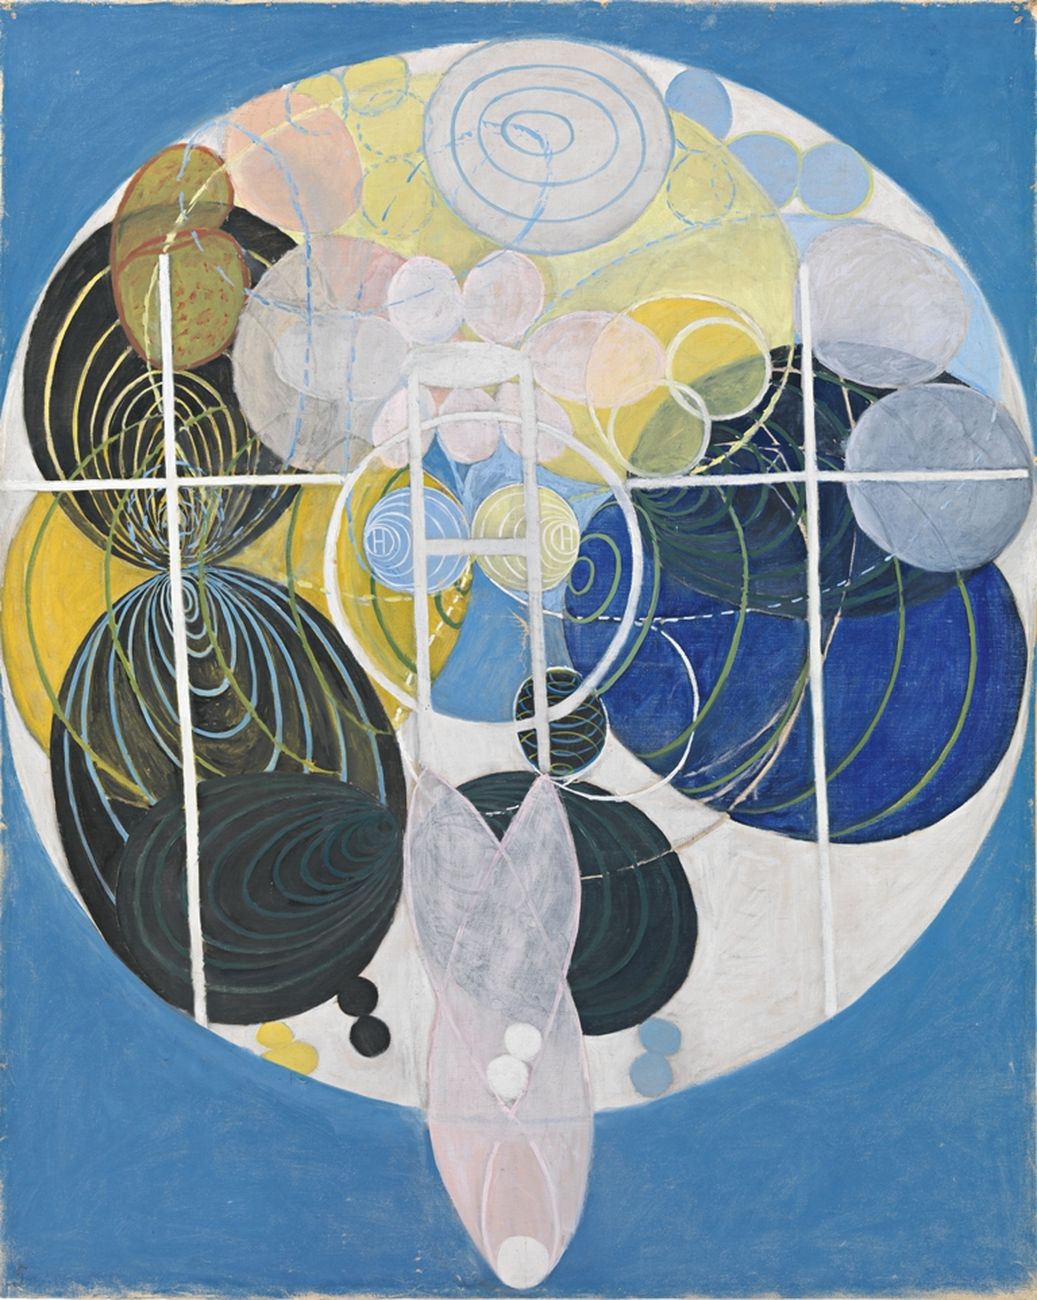 Hilma af Klint, Group III, The Large Figure Paintings, The Key to All Works to Date (The WU-Rose Series), 1907. Courtesy of the Hilma af Klint Foundation. Photo Moderna Museet, Stoccolma